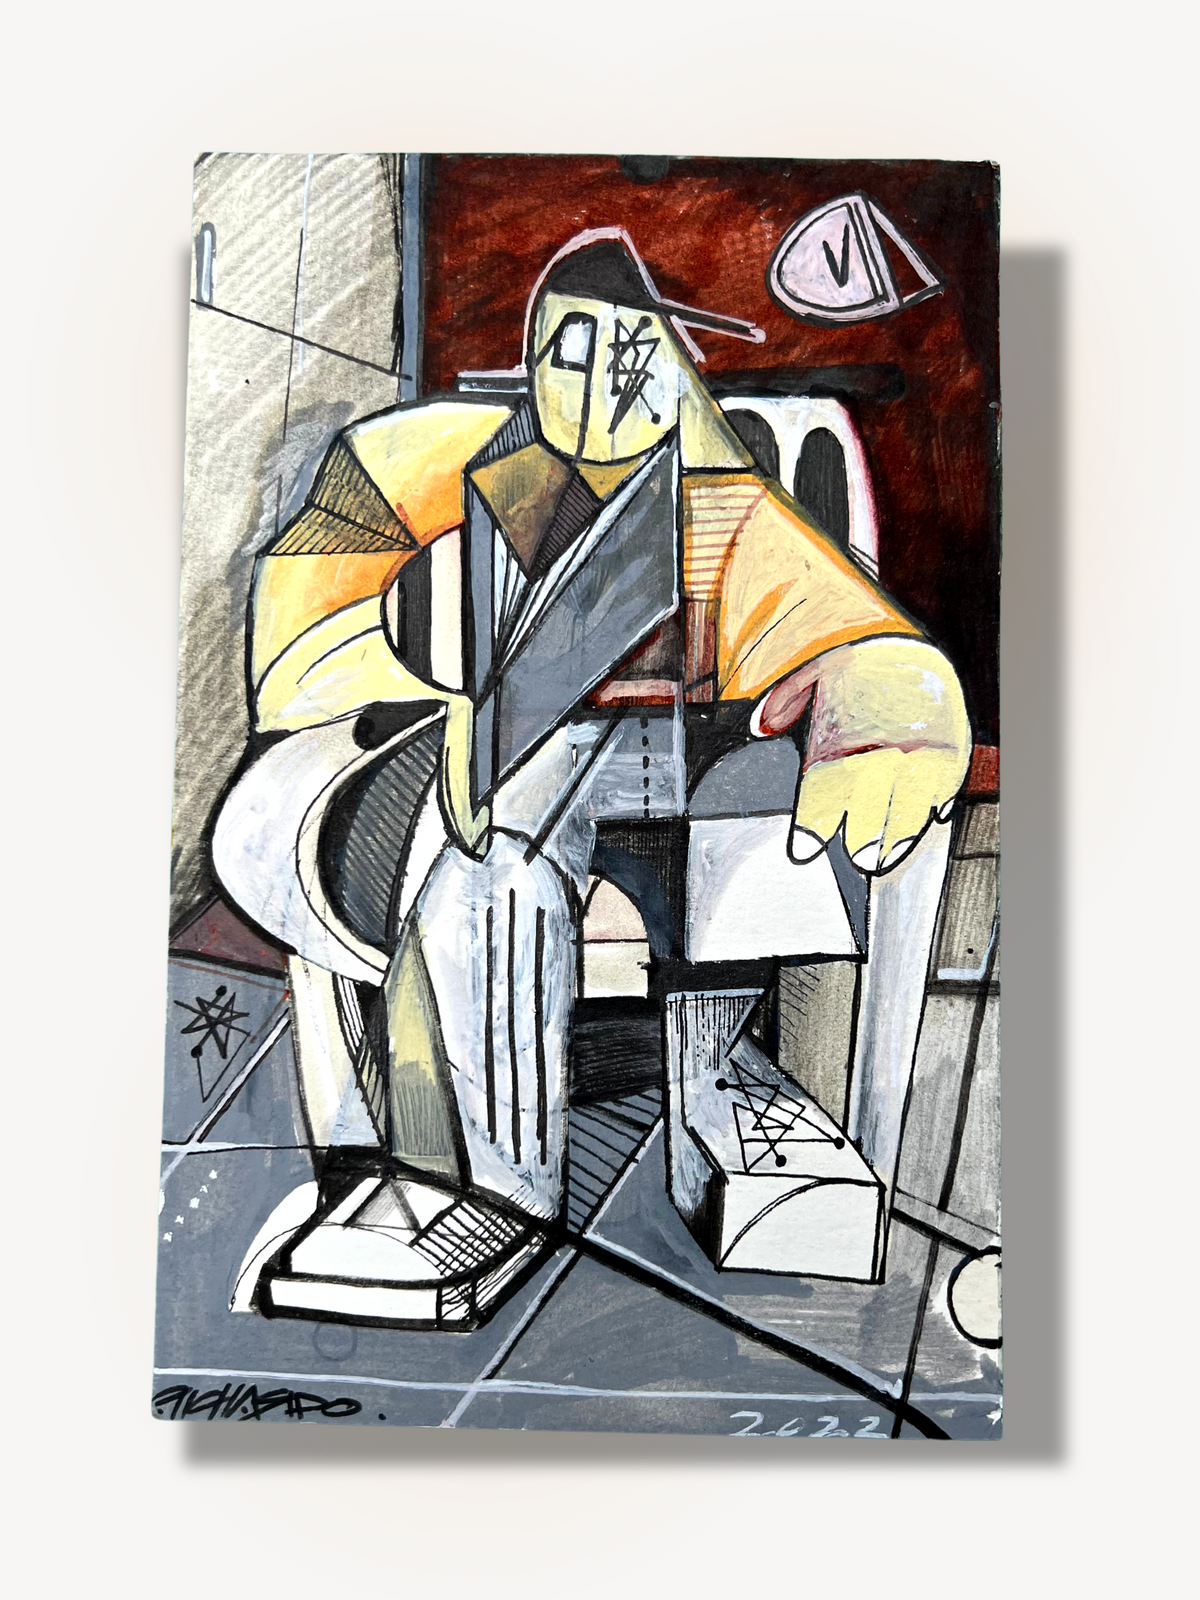 Homie Reading a Book !, Original Painting